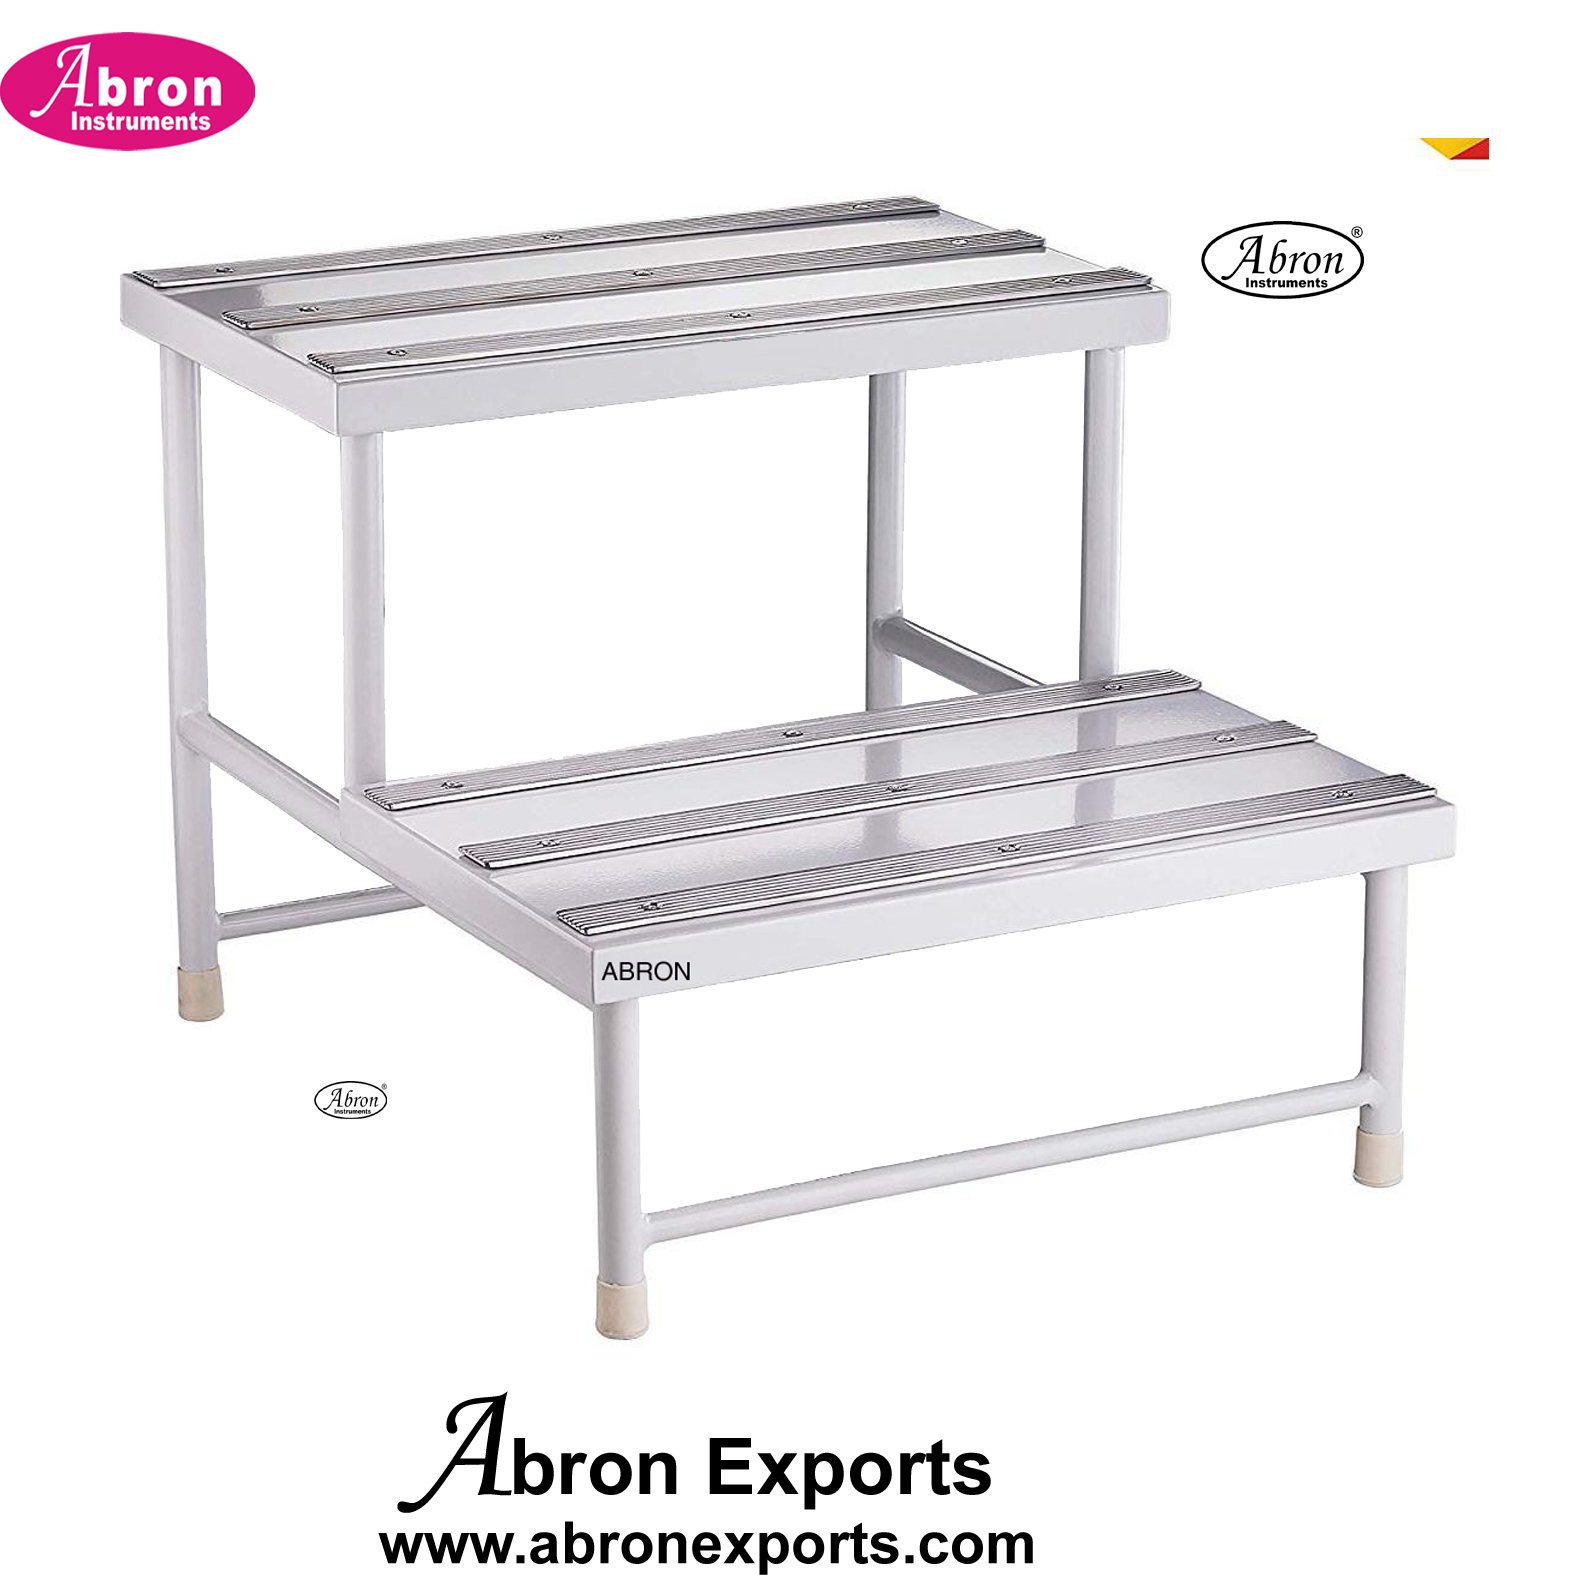 Stool stepping stool medical stainless steel Abron foot stools ABM-2273SP  